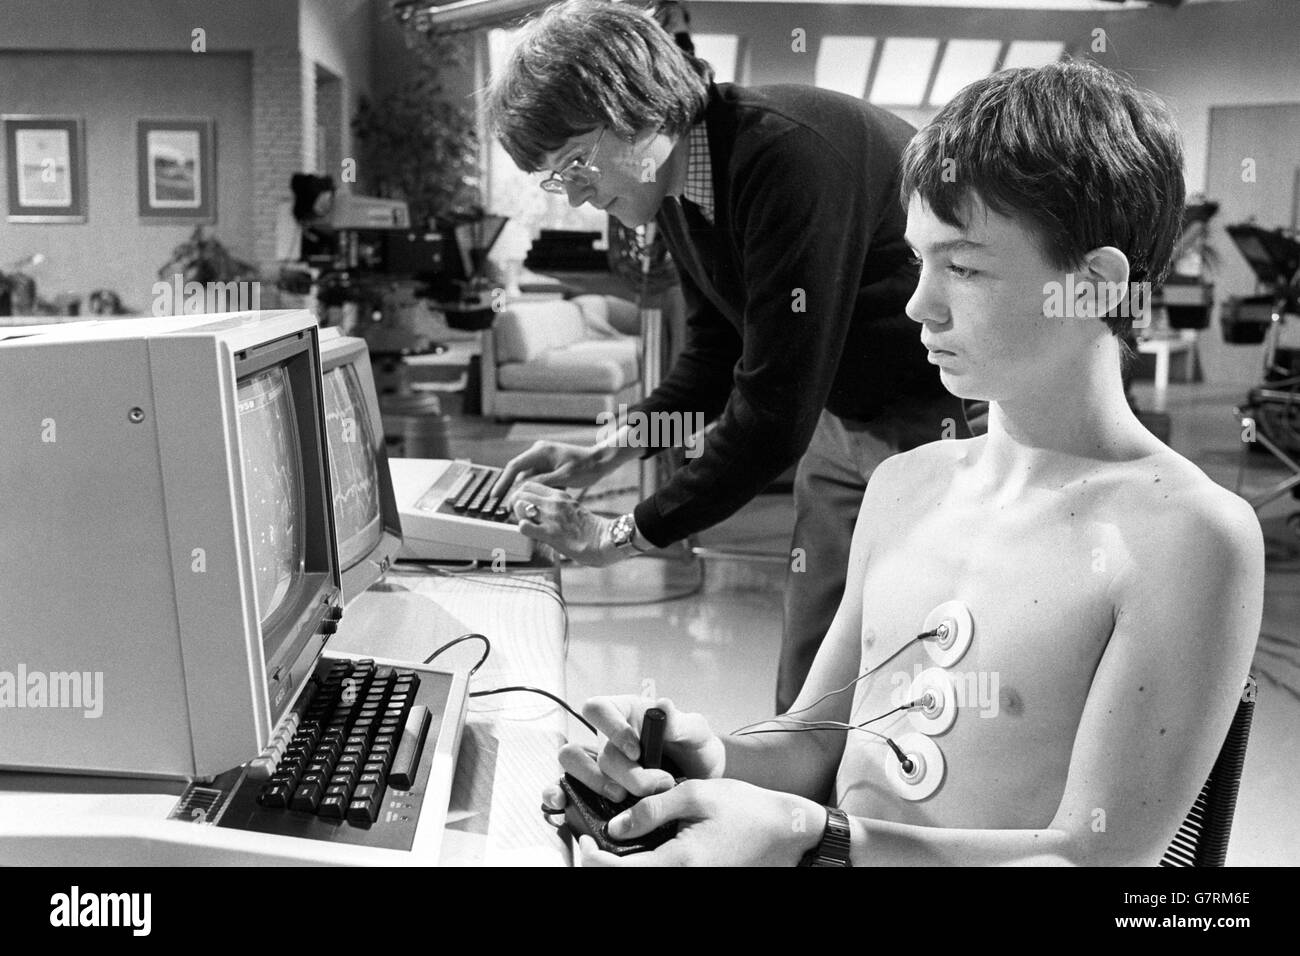 Derek Creasey, 14, of Marple Hill School, Stockport, begins his attempt to set a world record for non-stop playing of computer games, which was broadcast live on Good Morning Britain in London. He is also the subject of medical and scientific research into the physical and psychological effects home computers can have on children. Stock Photo